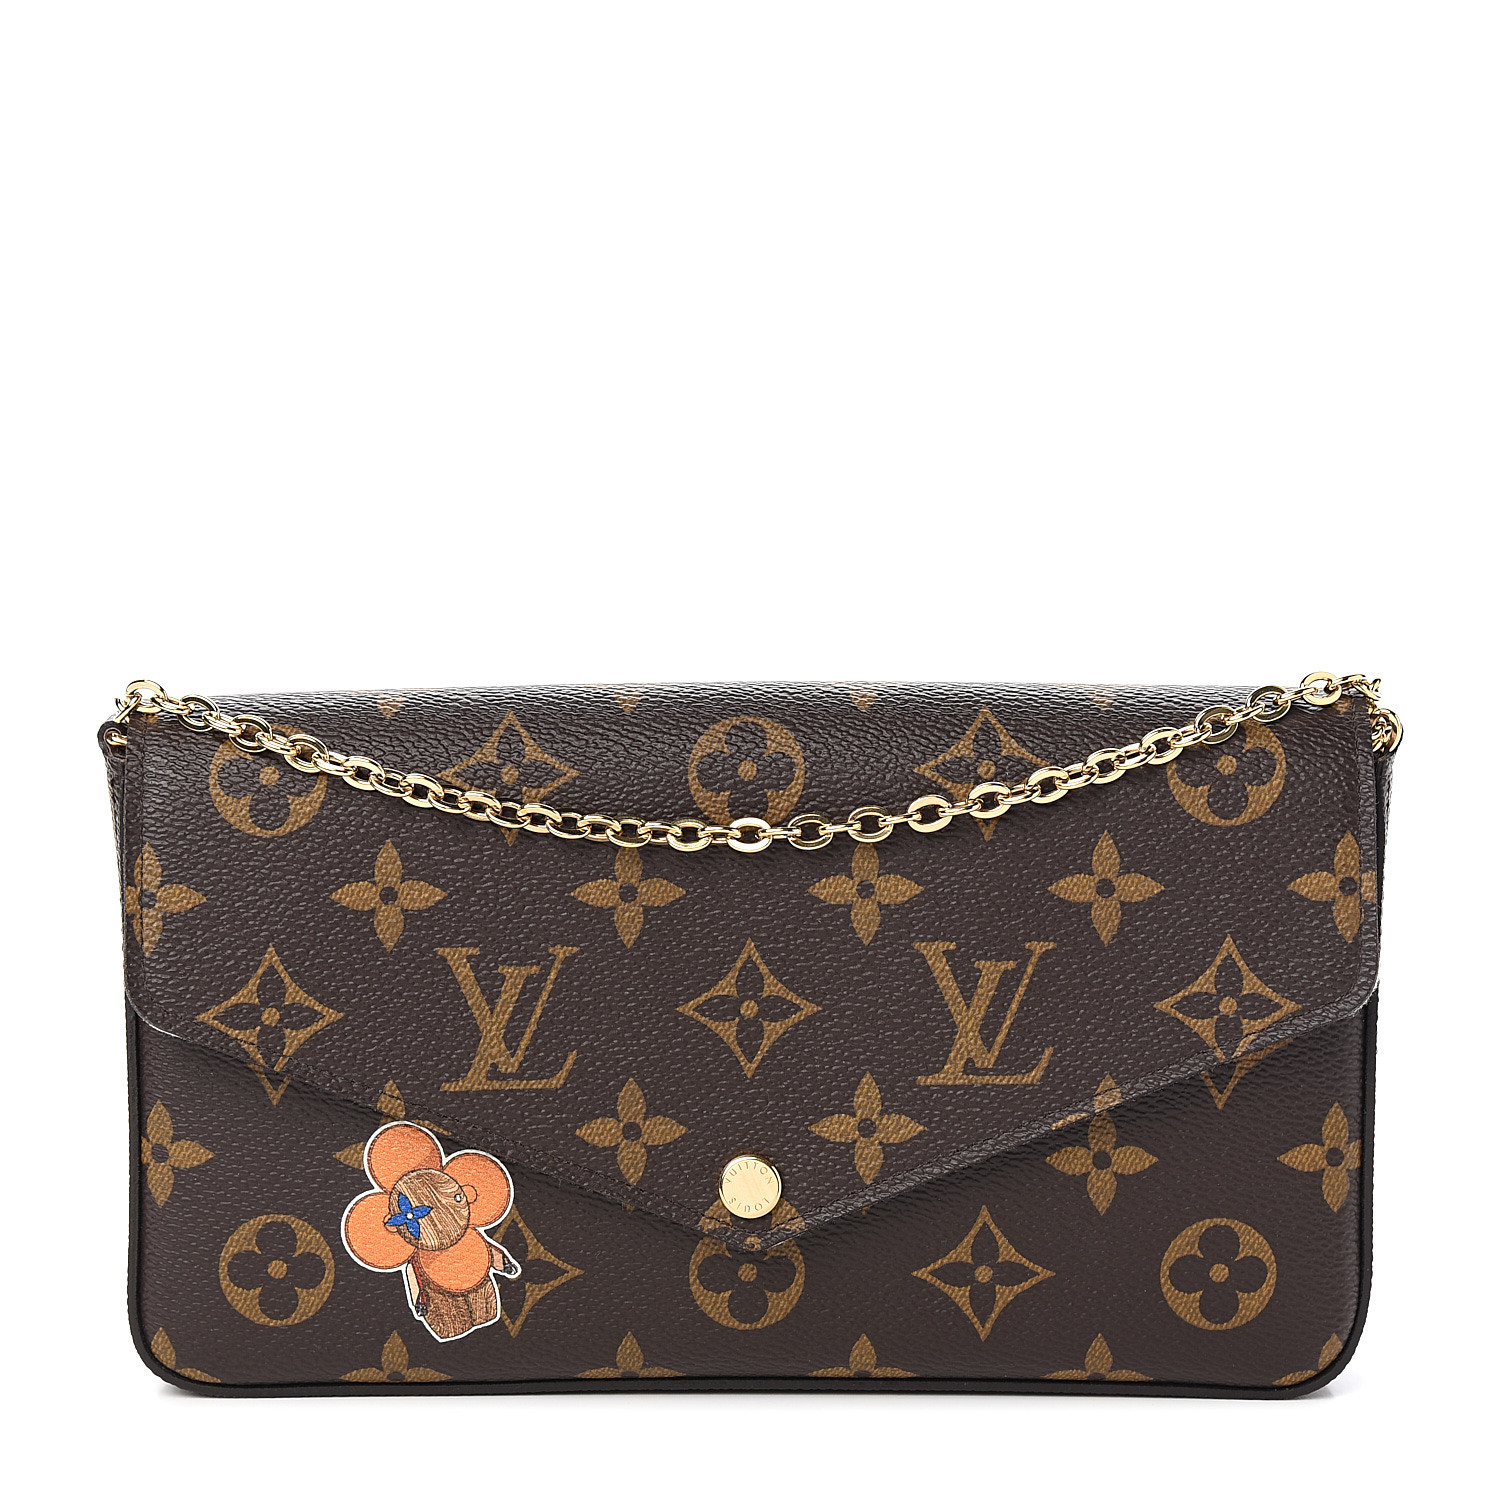 Felicie Pochette By Louis Vuitton for Sale in Indianapolis, IN